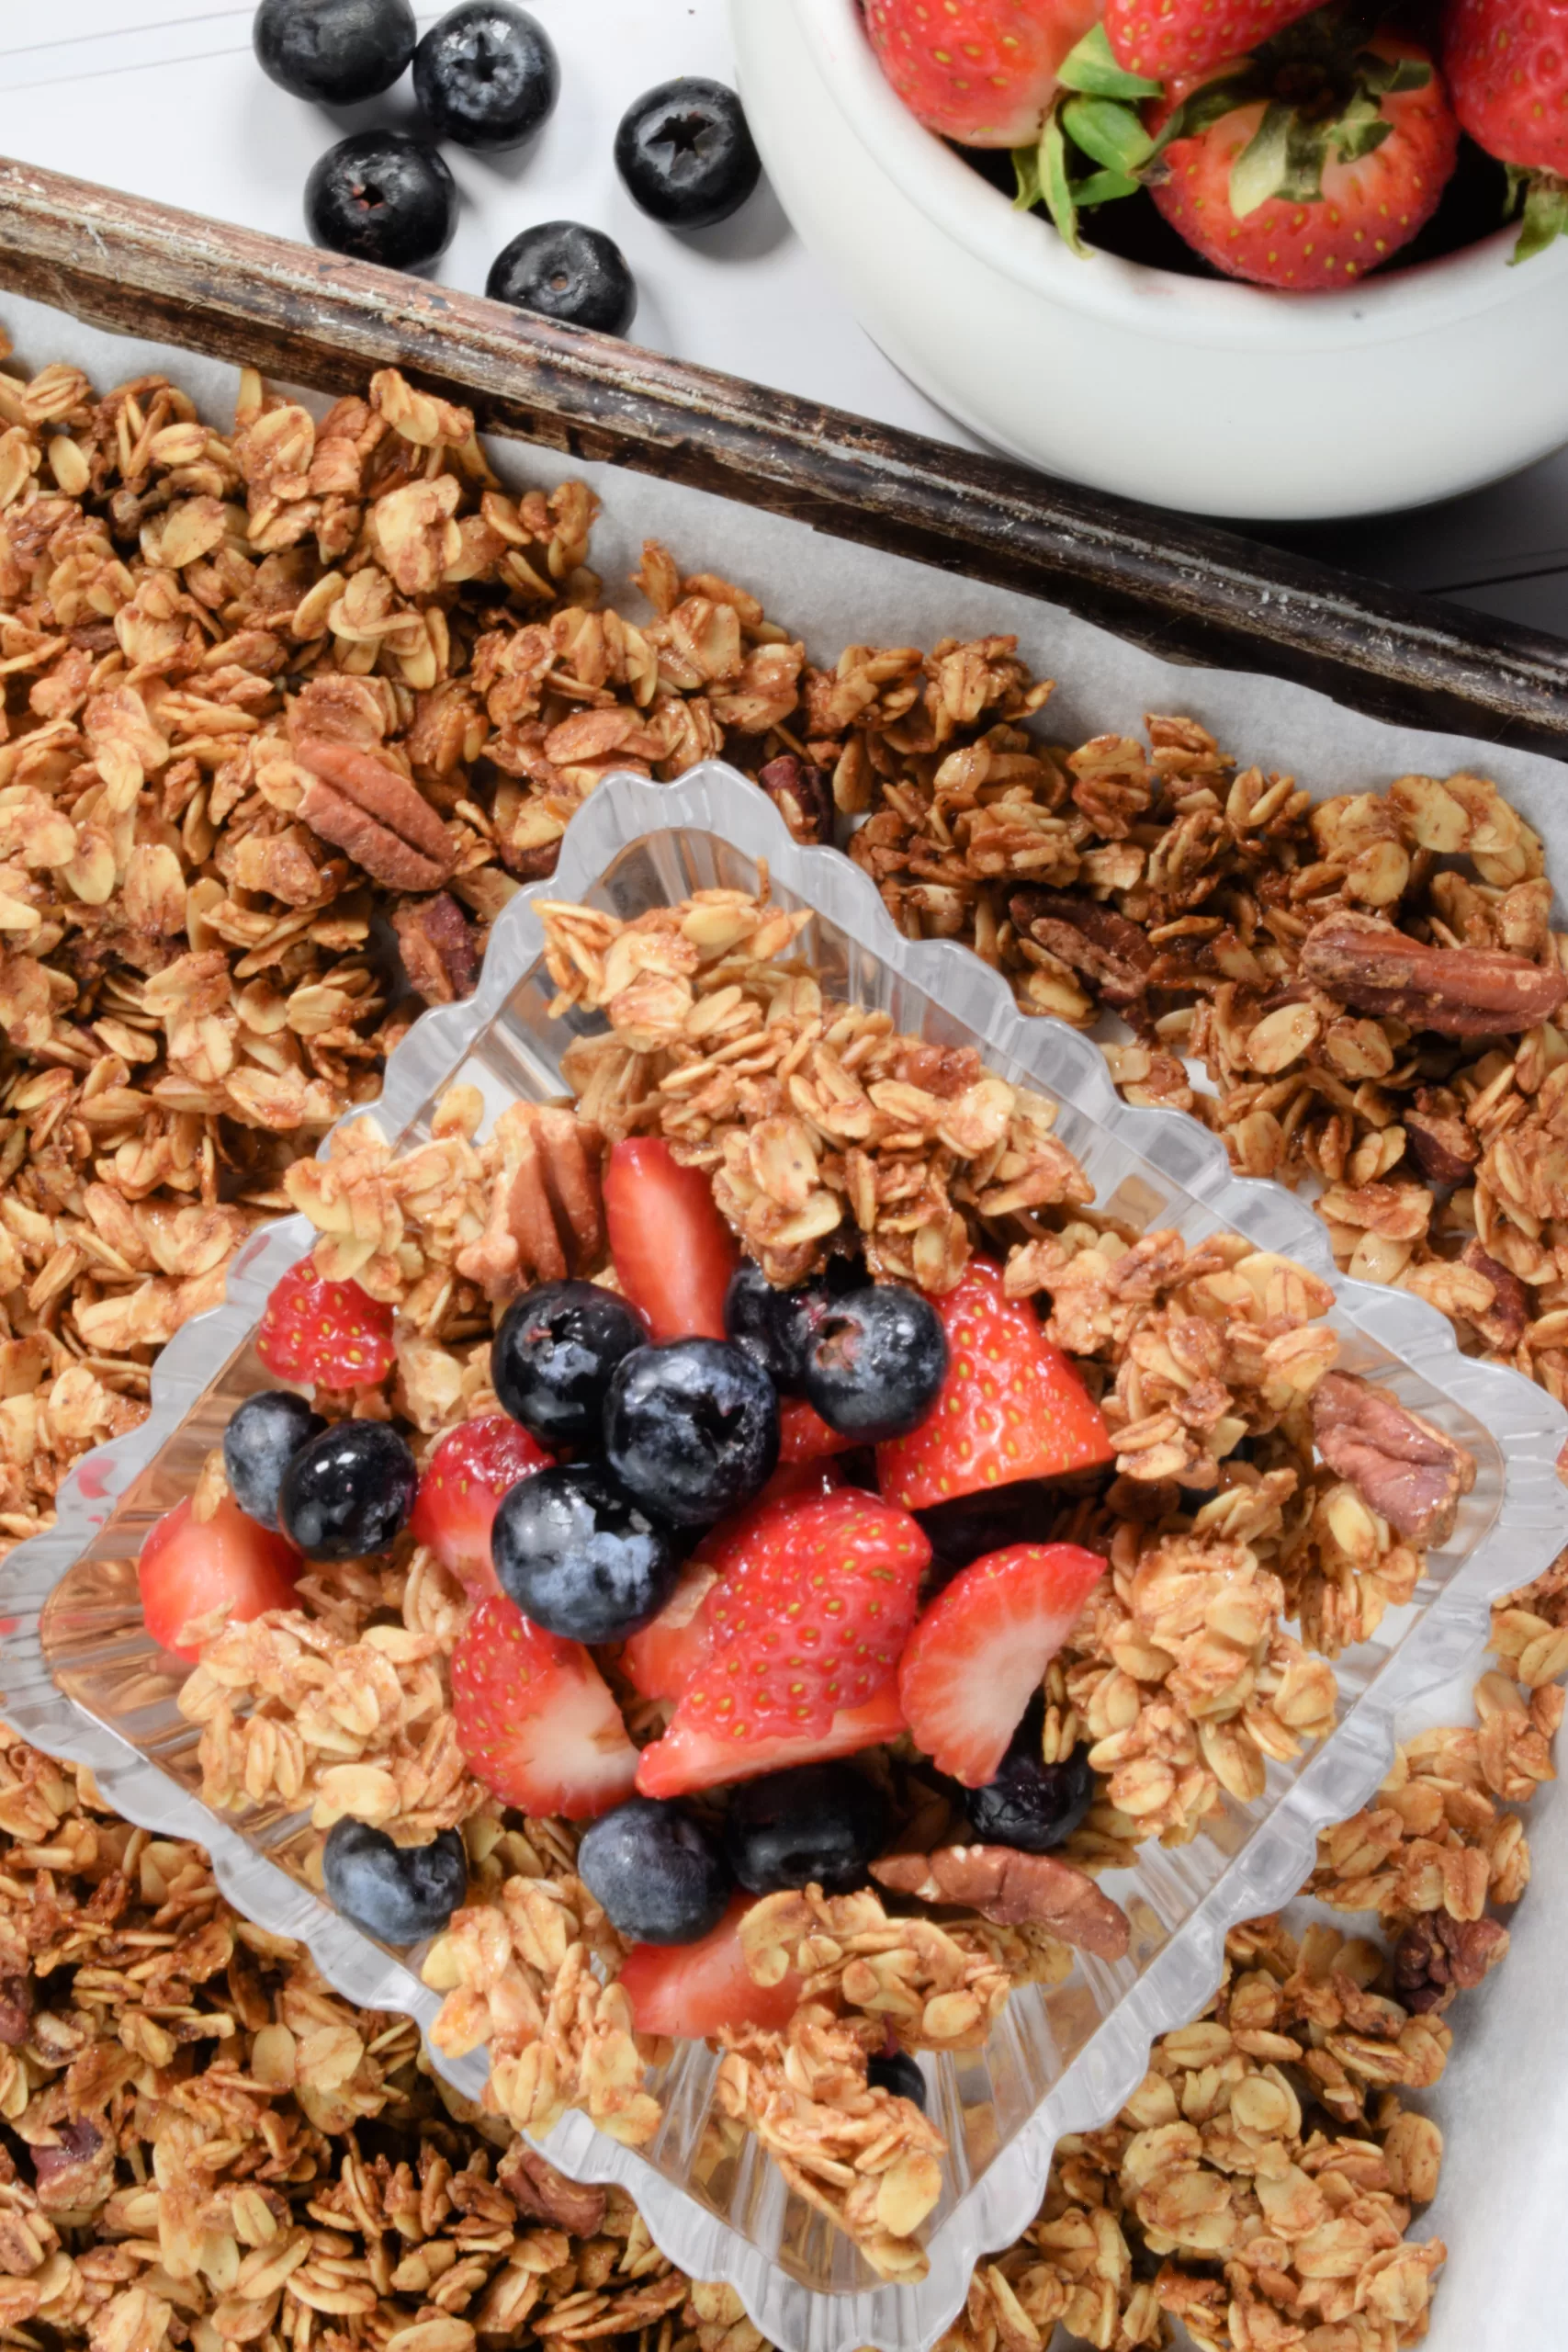 Homemade trail mix with strawberries and blueberries for Best Healthy Homemade Granola (Quick and Easy Recipe).